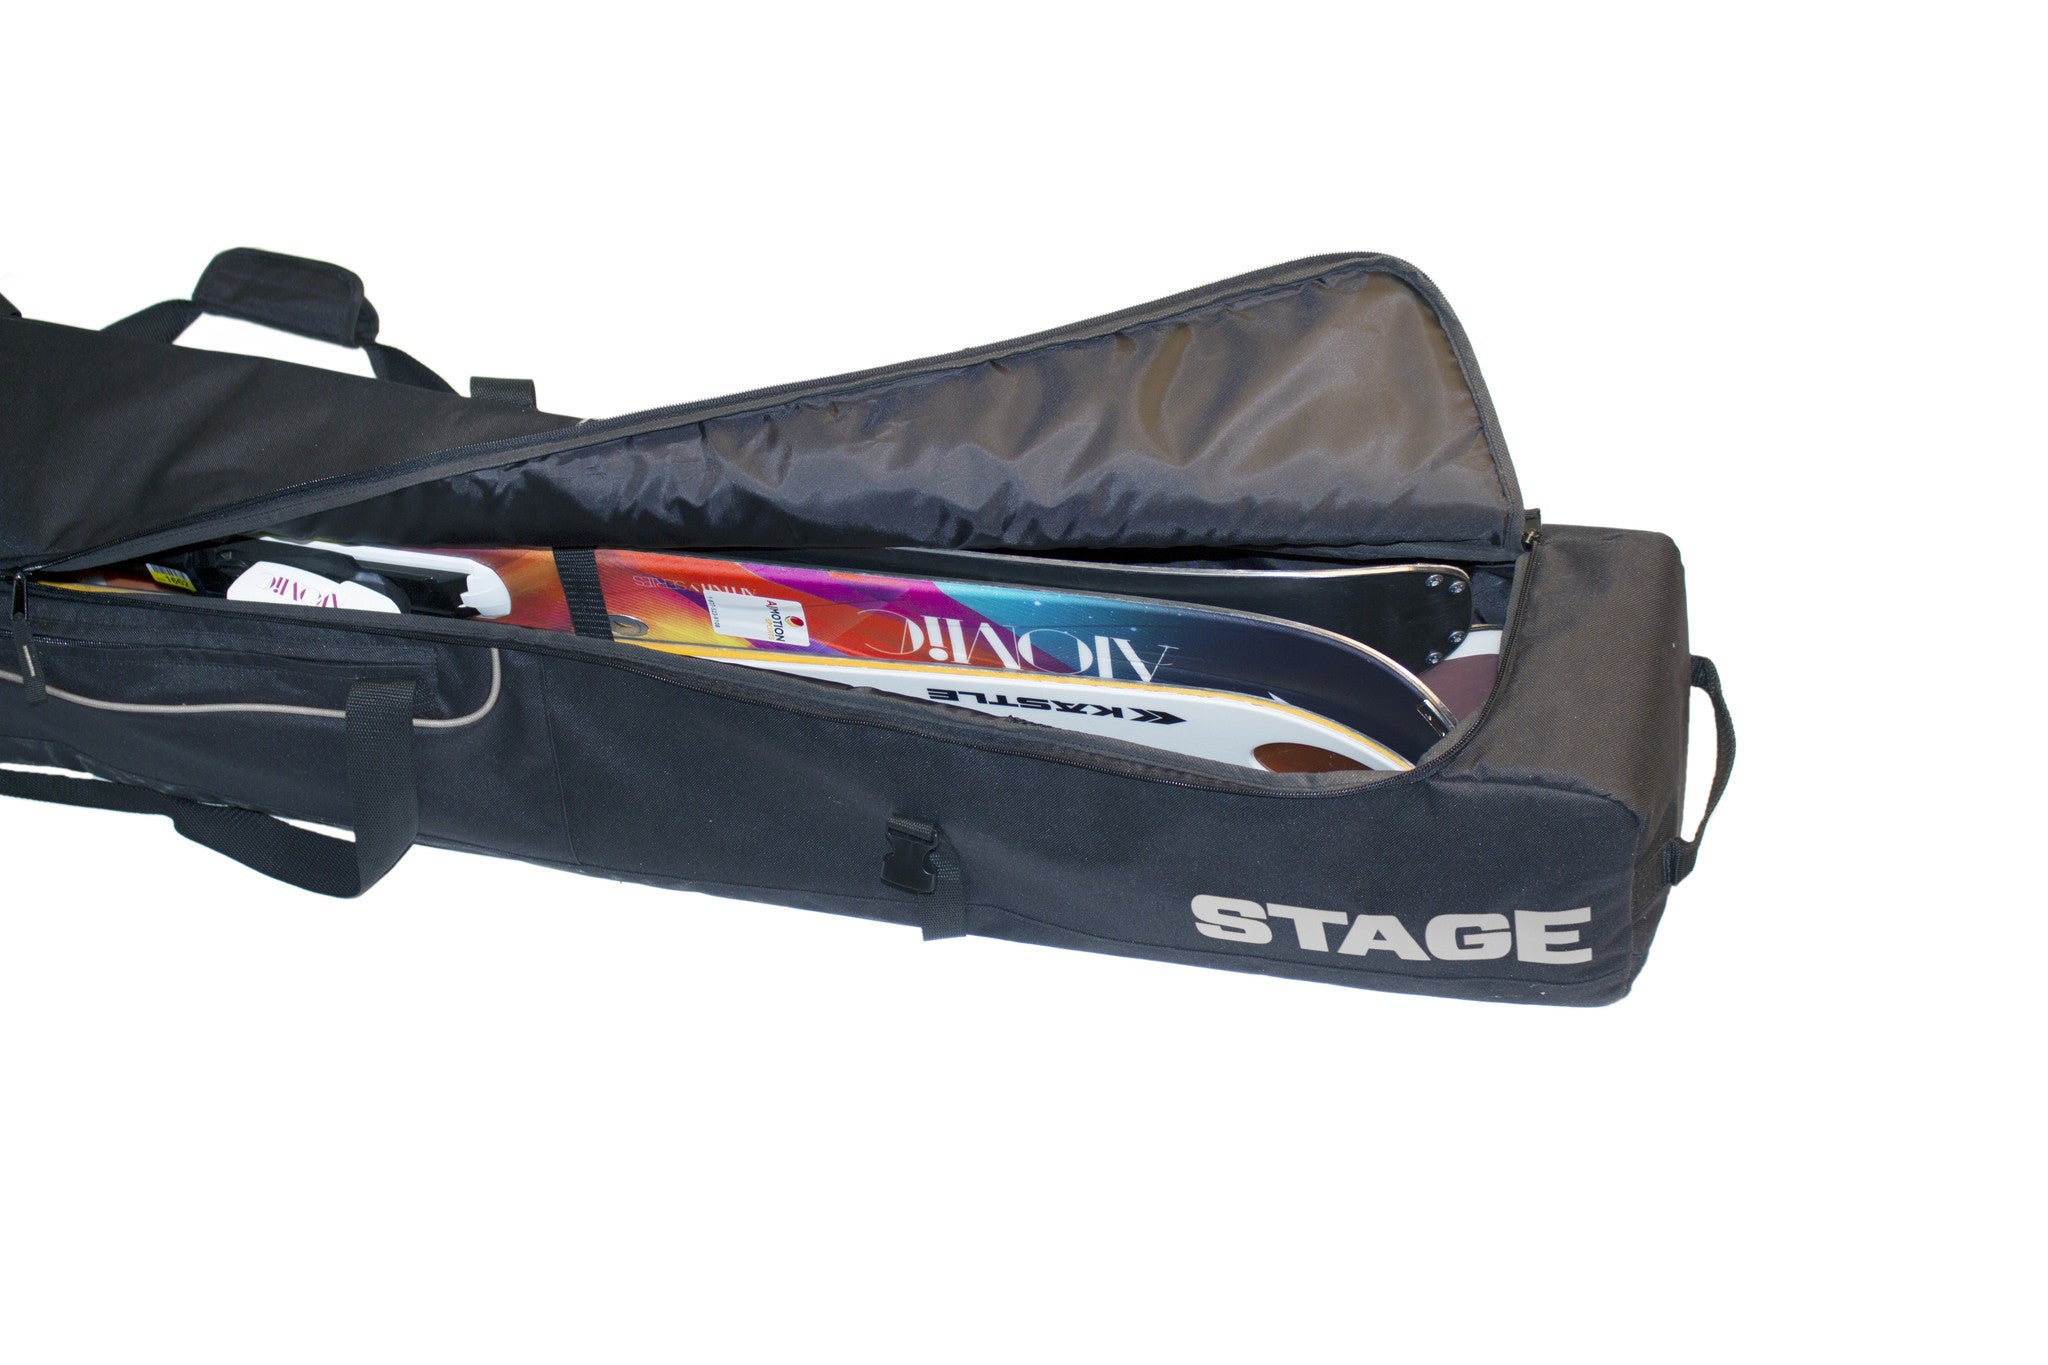 Stage_SkiBags_small_silverOpen.jpg